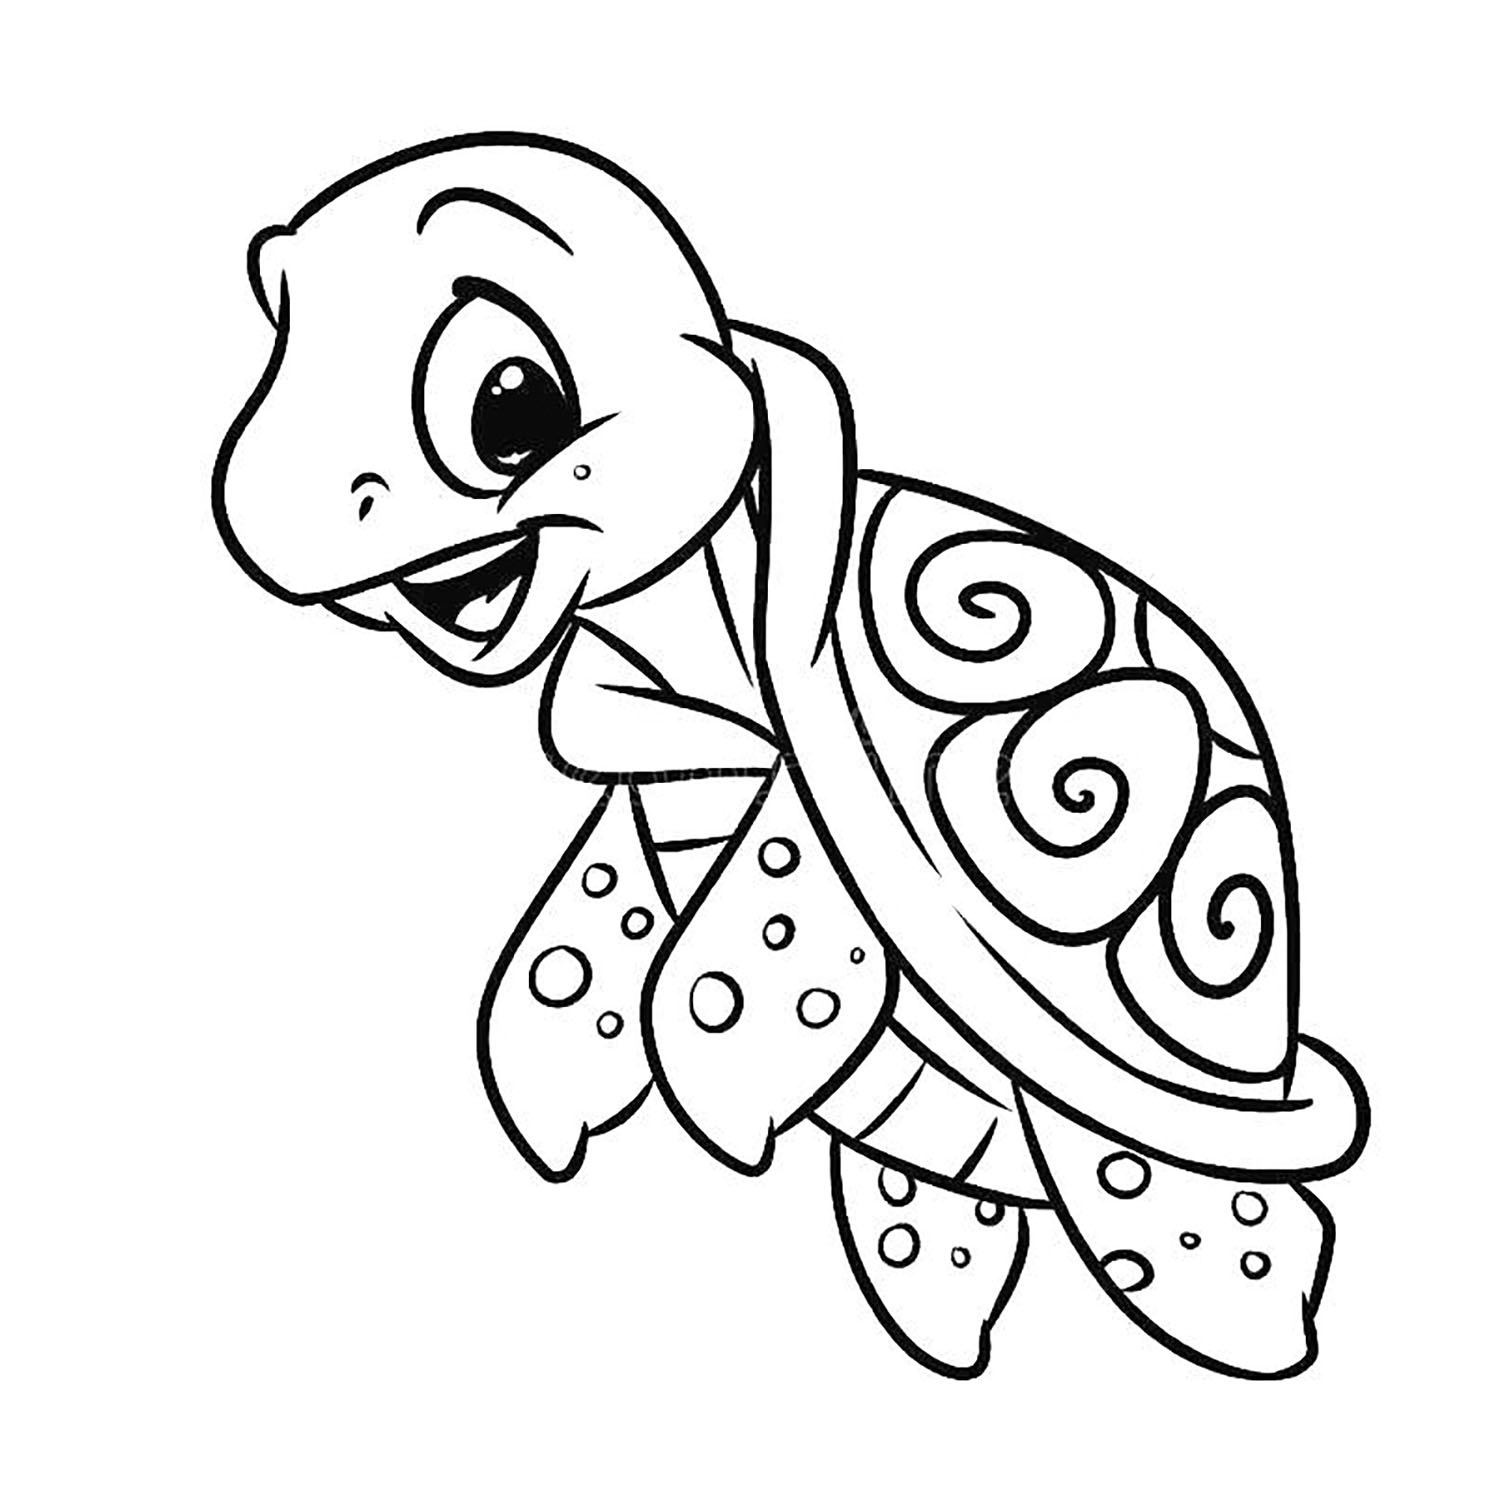 Free Printable Turtle Coloring Pages Get Your Hands on Amazing Free